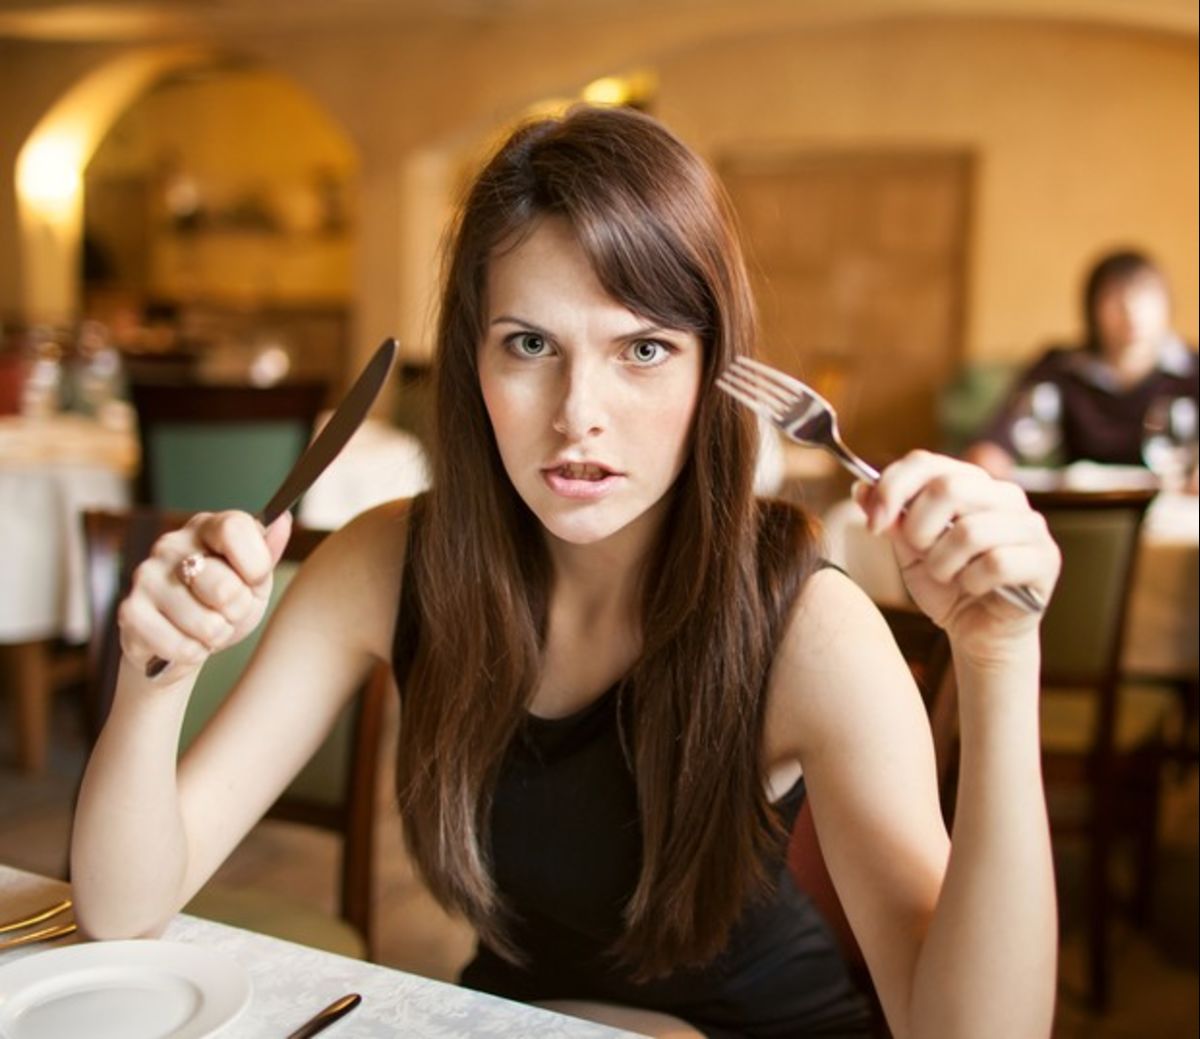 7 actions that make restaurant staff uncomfortable - 2